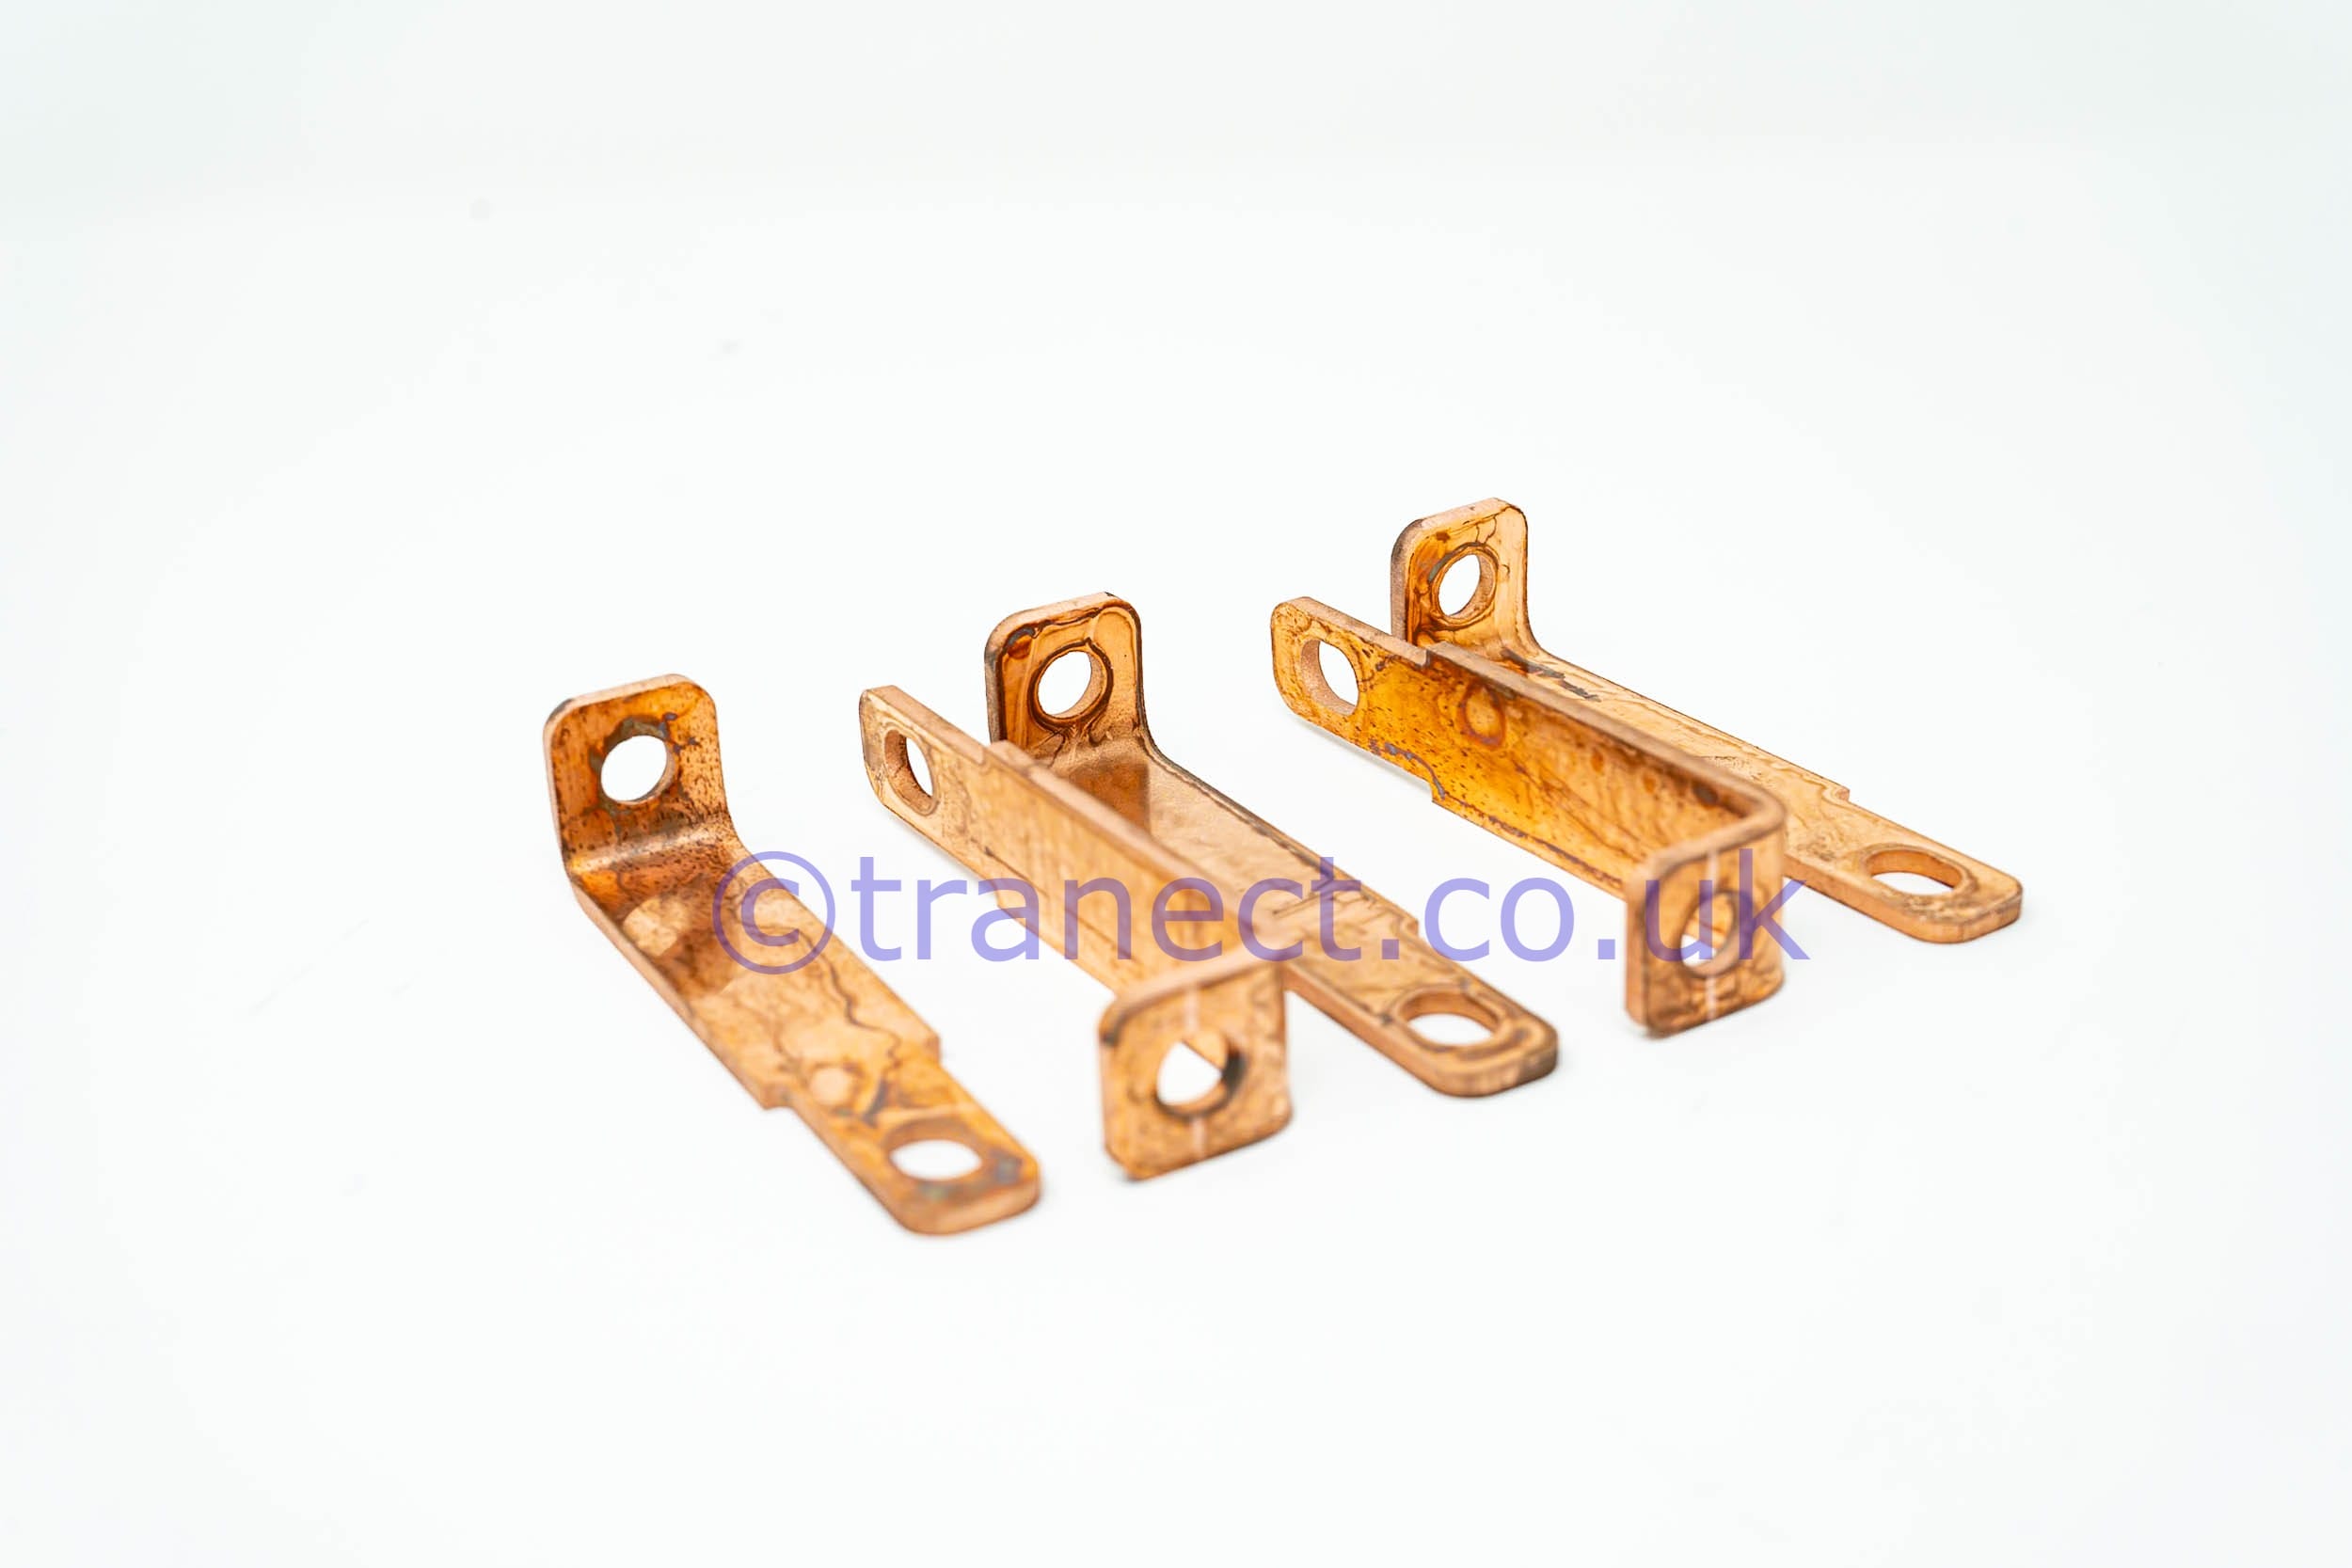 Copper busbars for Electric Vehicles